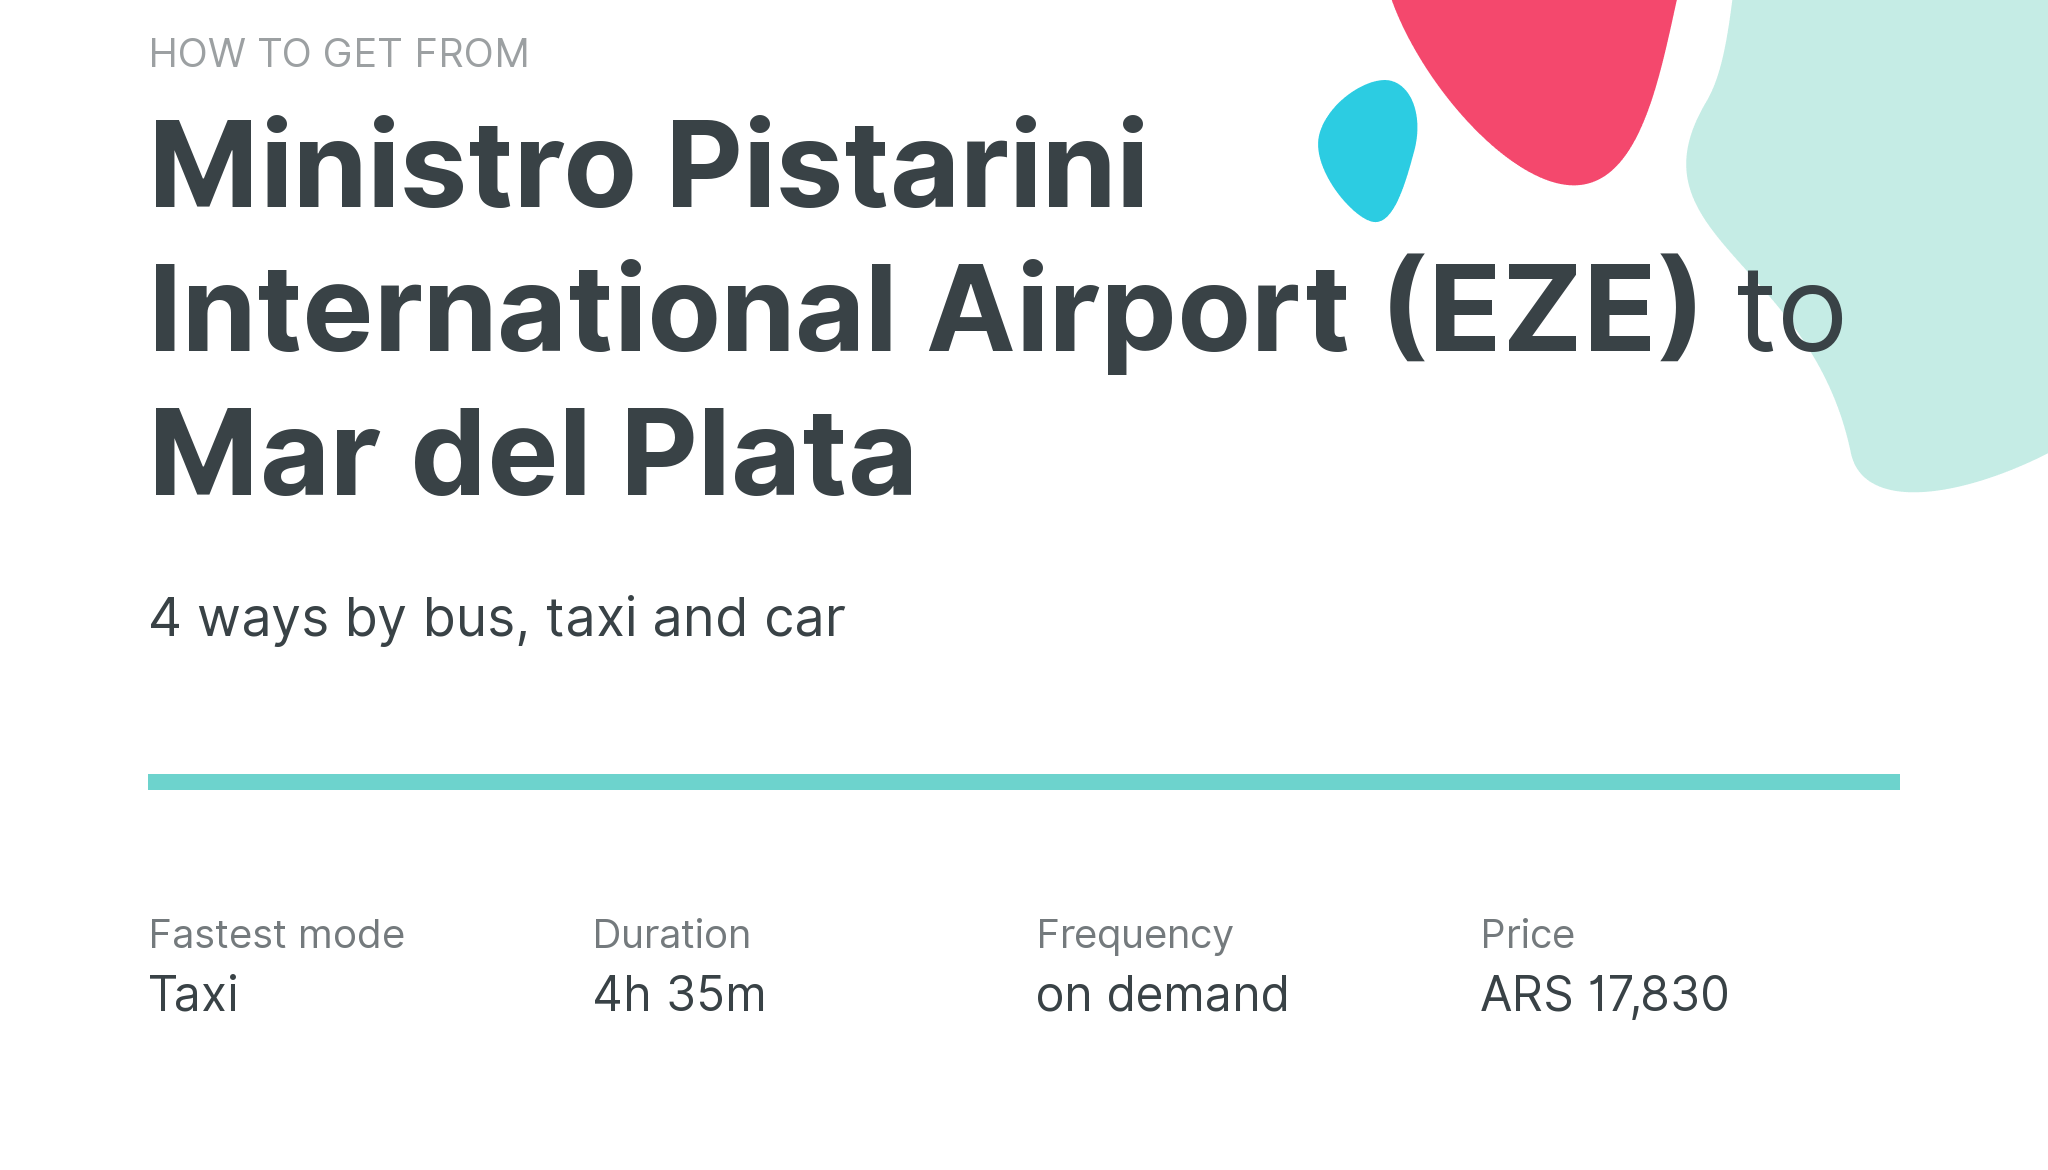 How do I get from Ministro Pistarini International Airport (EZE) to Mar del Plata